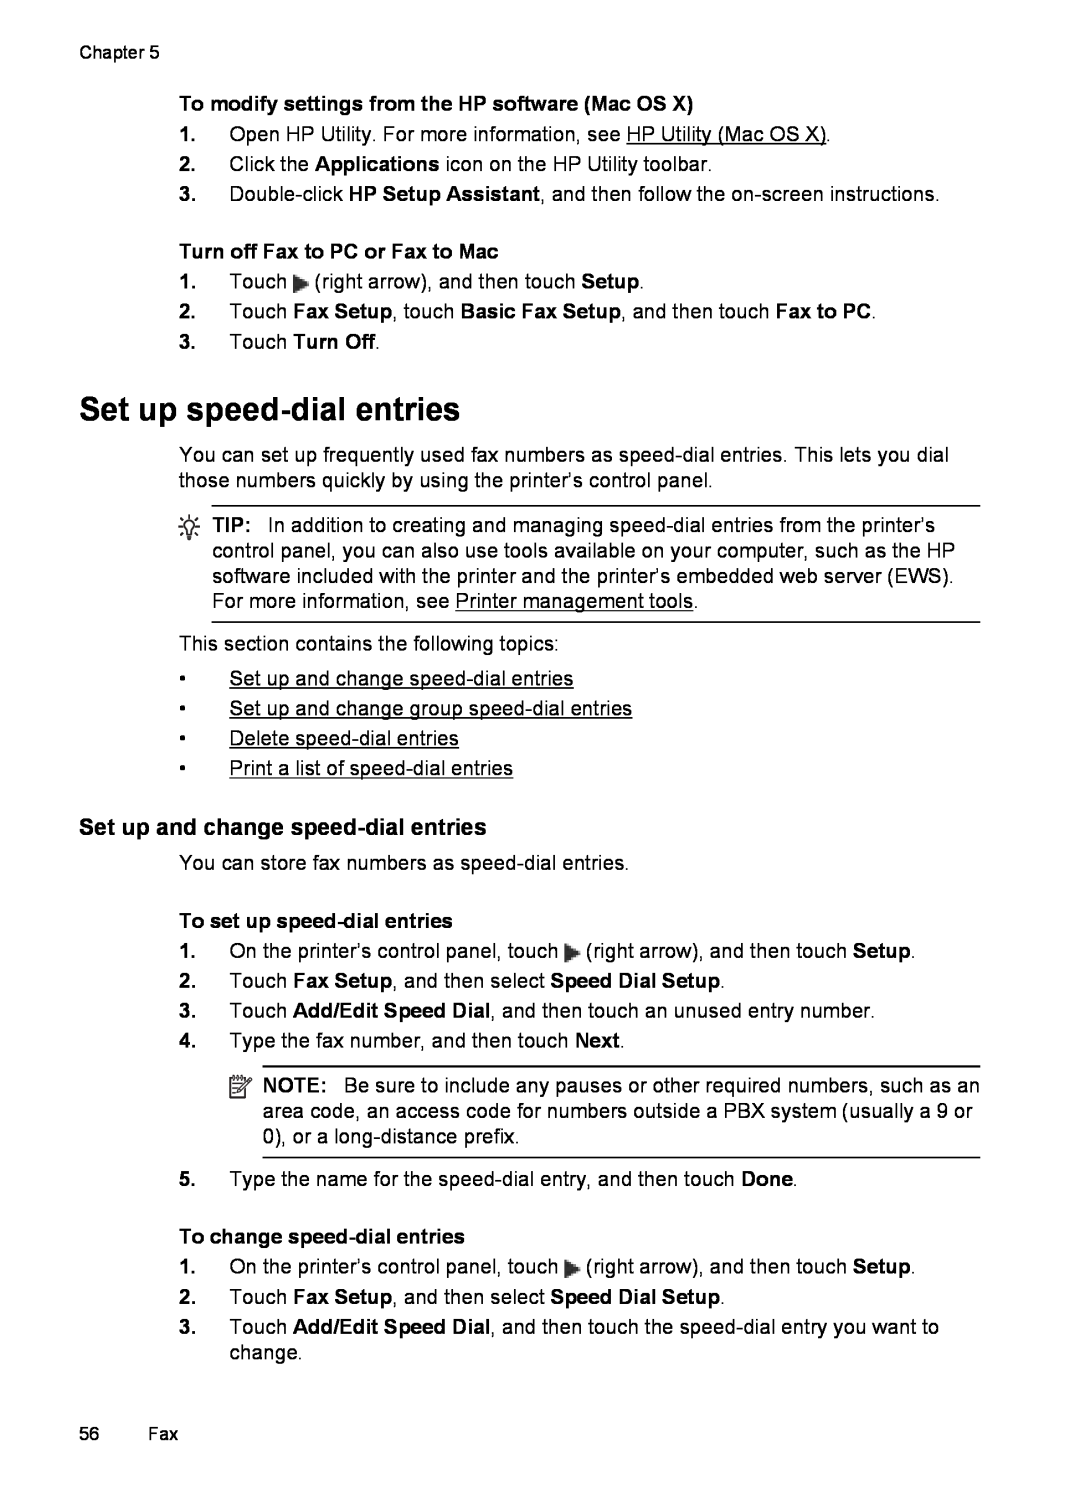 HP 6600 - H7 manual Set up speed-dial entries, Set up and change speed-dial entries, Turn off Fax to PC or Fax to Mac 